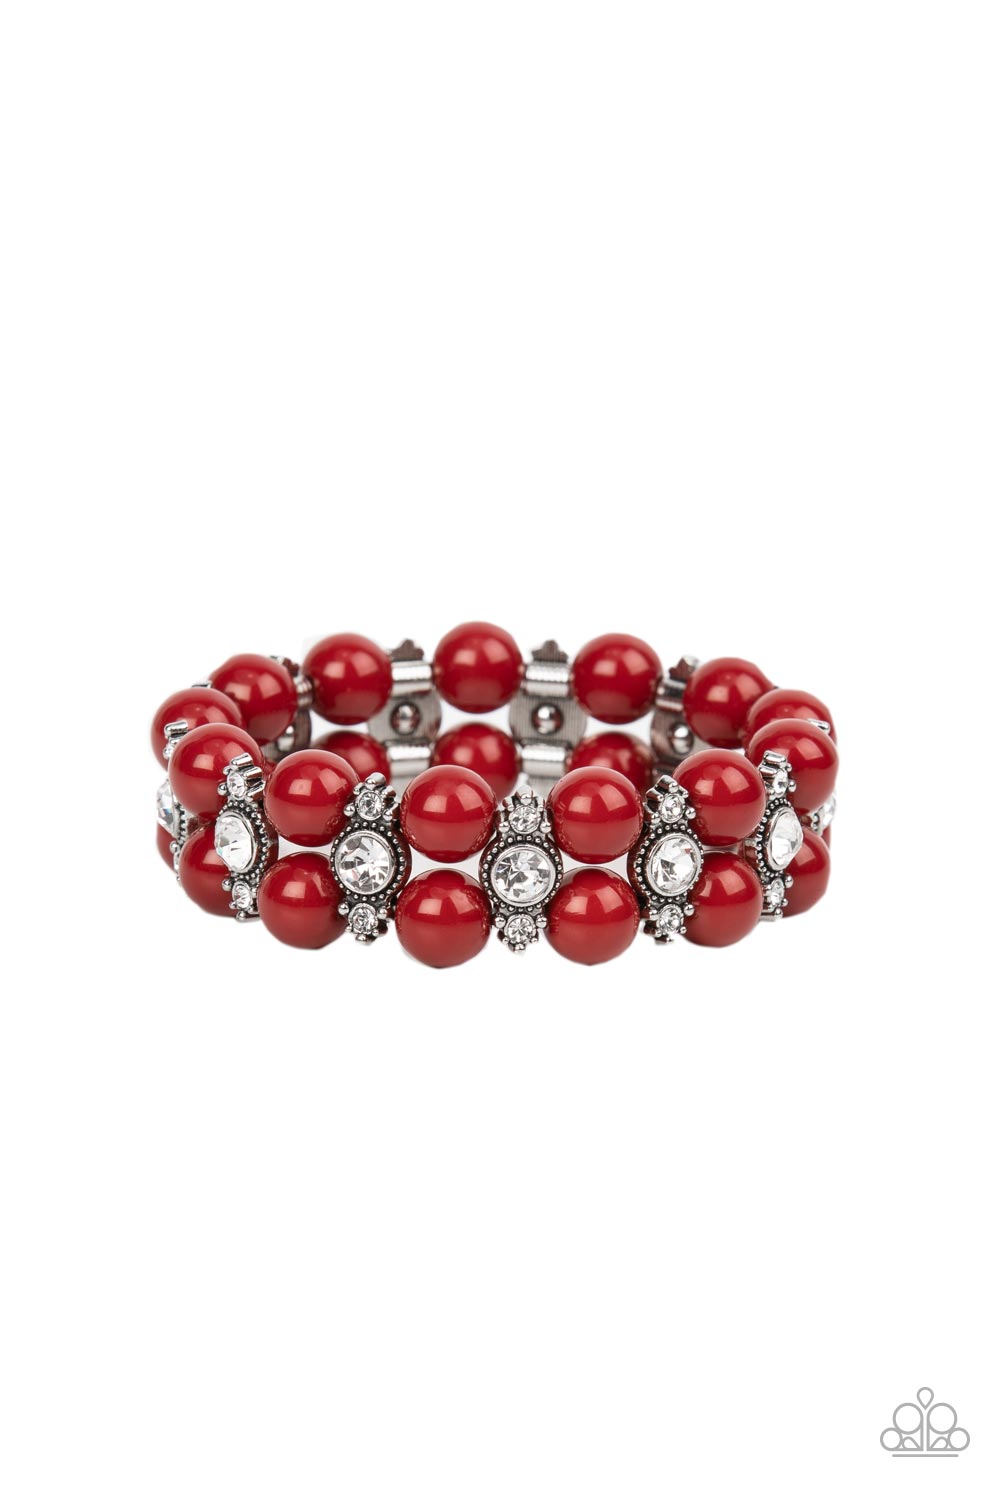 Starlight Reflection - Red Stretchy Fashion Bracelet - Paparazzi Accessories - Pairs of Fire Whirl beads join white rhinestone encrusted silver frames along stretchy bands around the wrist, resulting in a refined pop of color. Sold as one individual bracelet. 